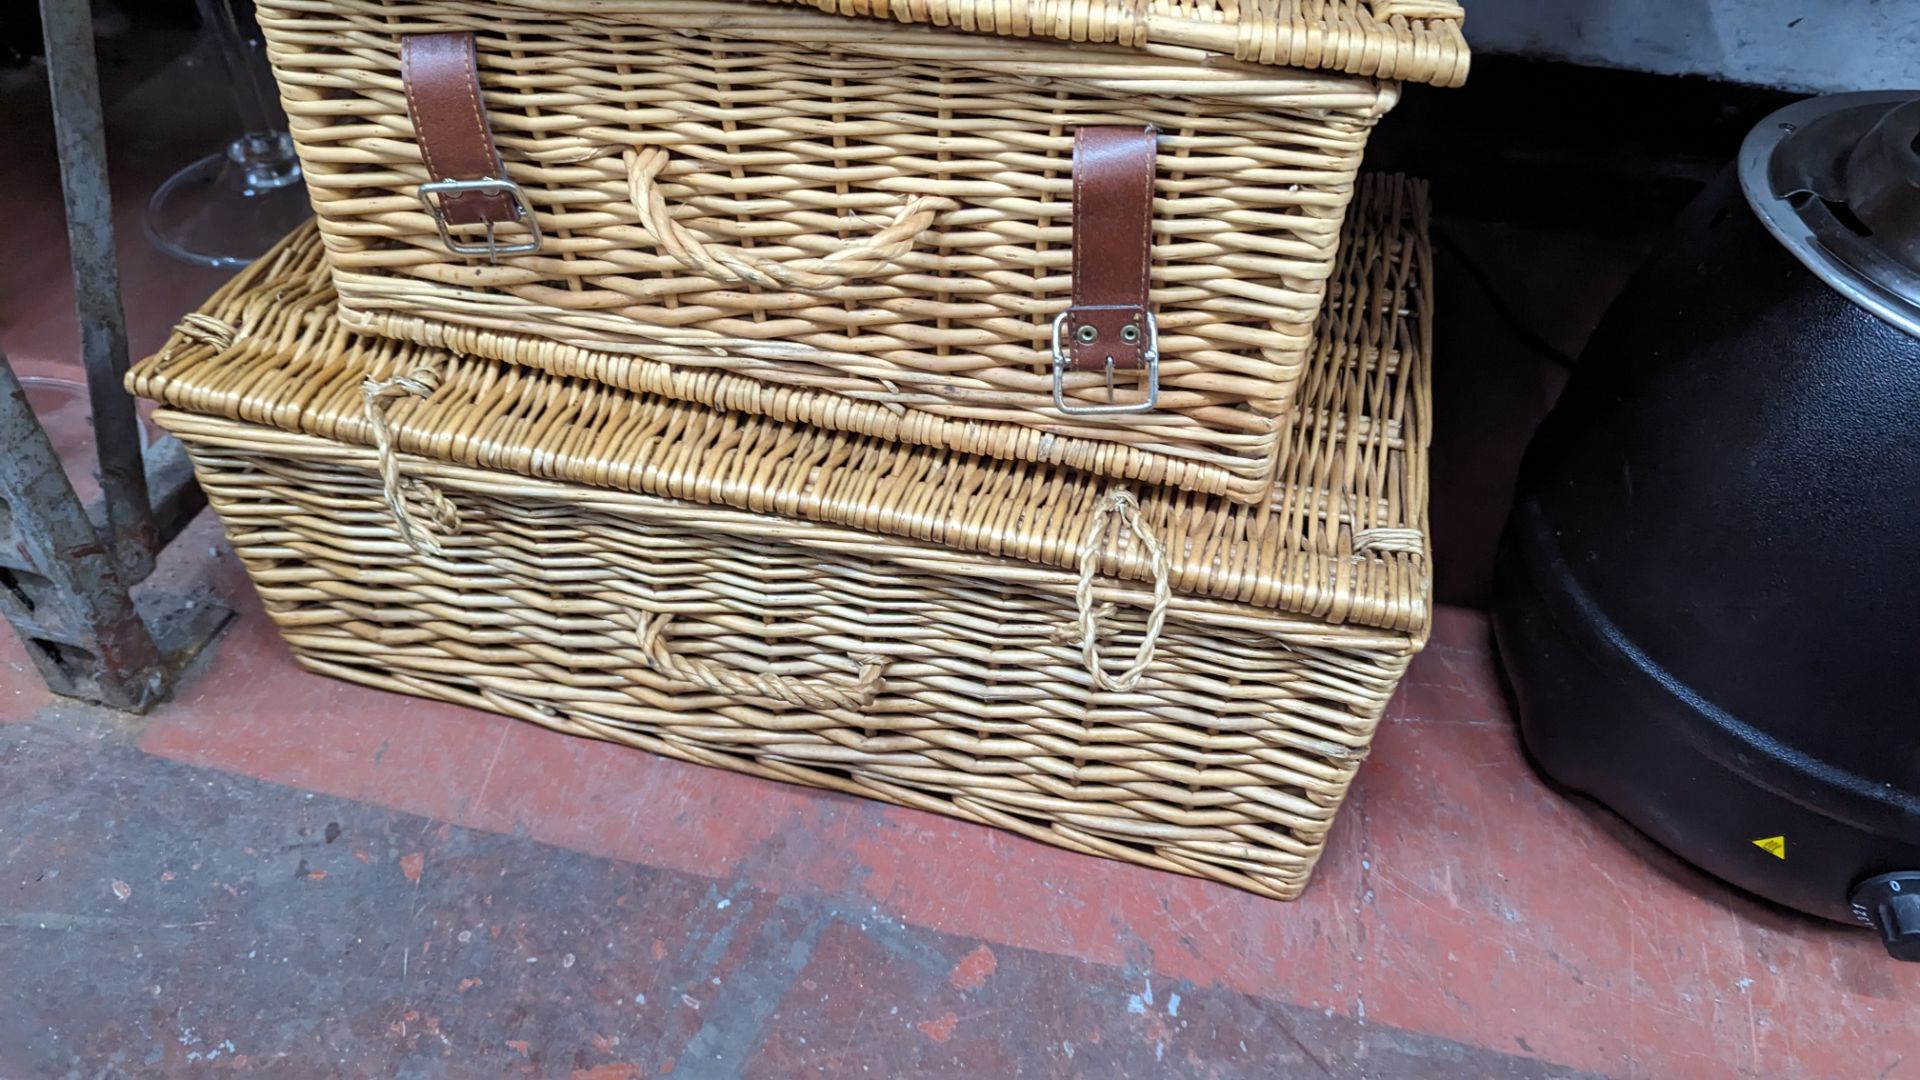 3 off assorted size picnic baskets - Image 5 of 5